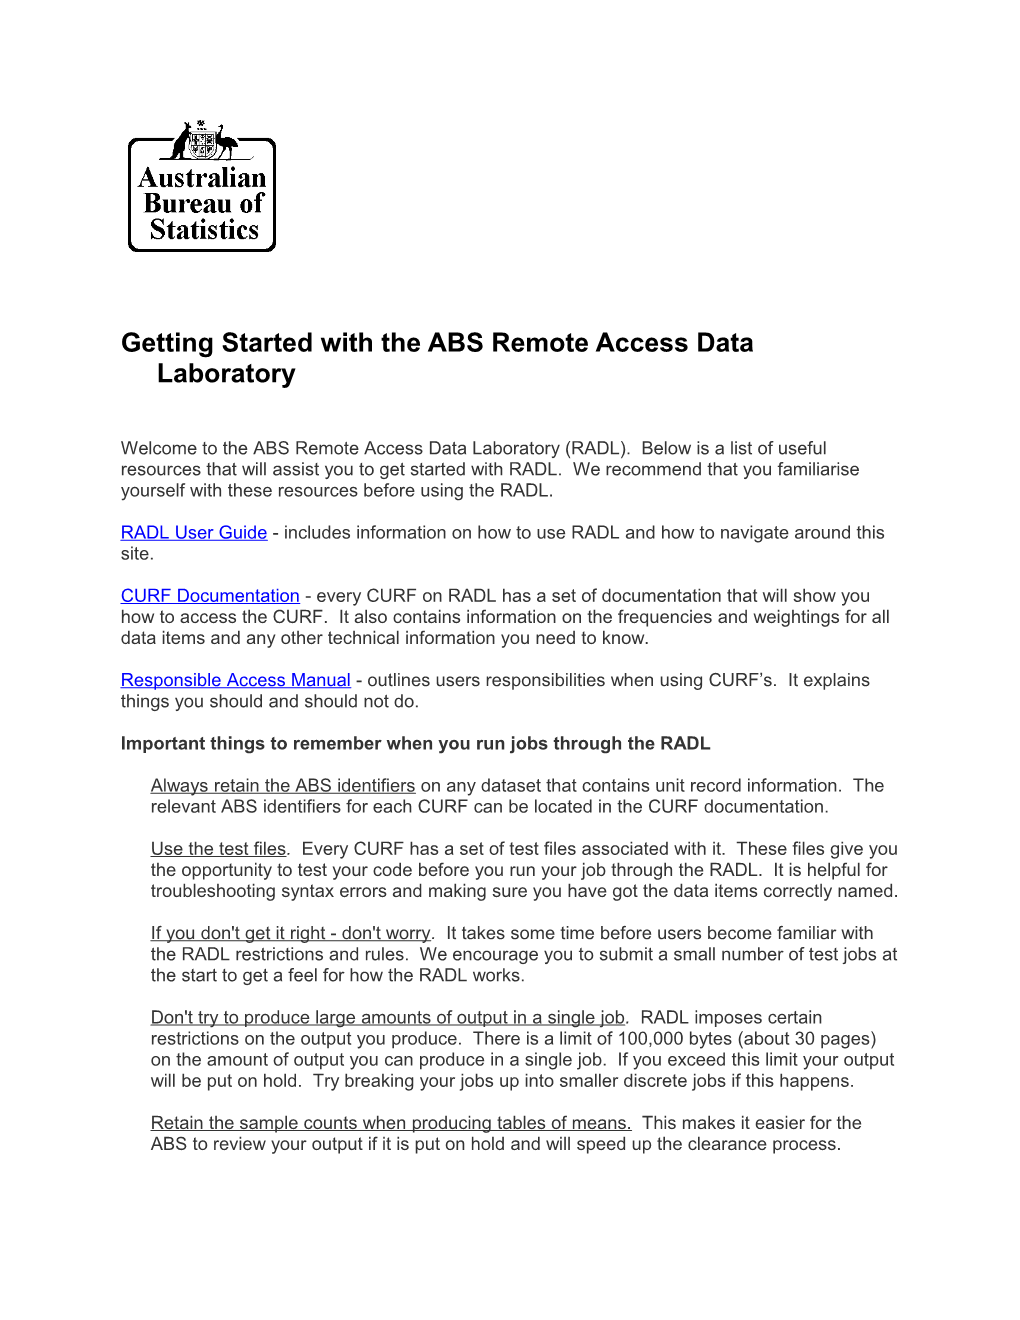 Getting Started with the ABS Remote Access Data Laboratory